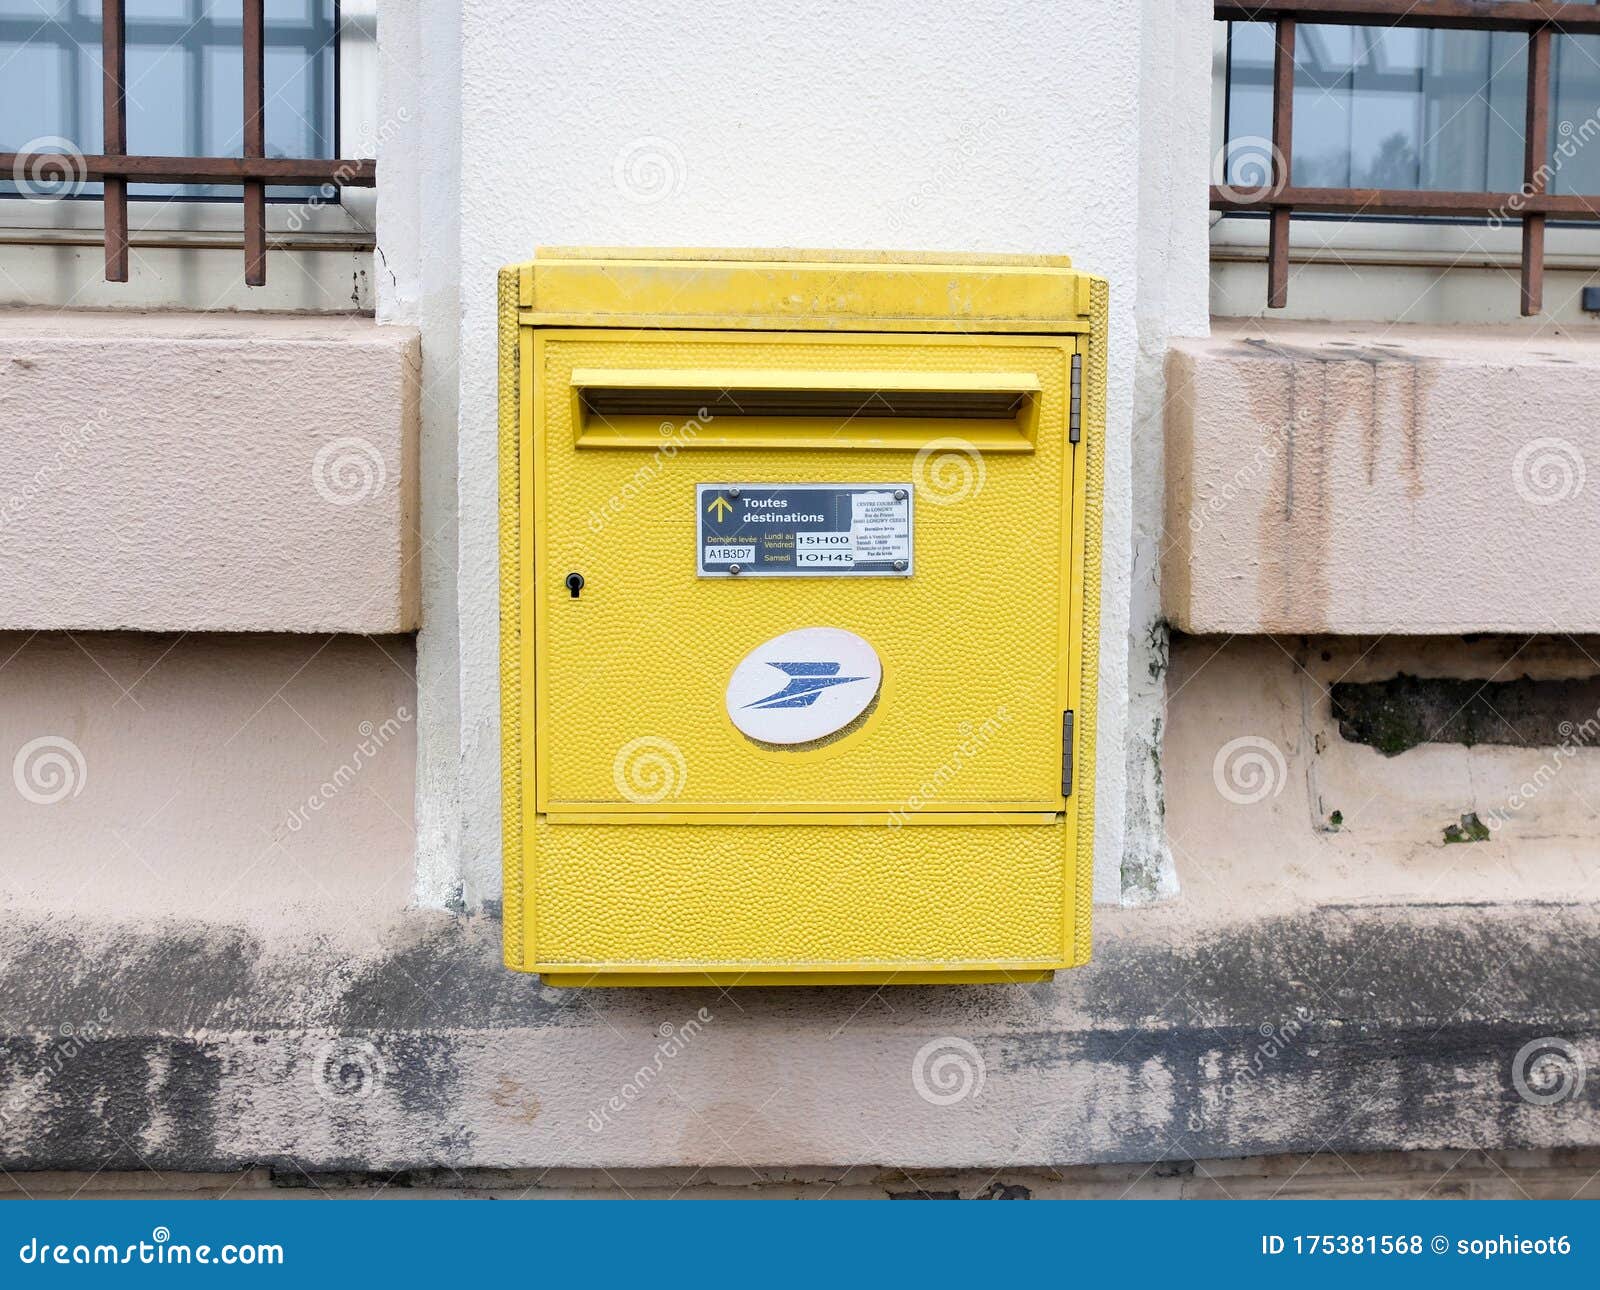 France Post Office Yellow Mailbox, La Poste Editorial Stock Photo - Image  of european, letterbox: 175381568